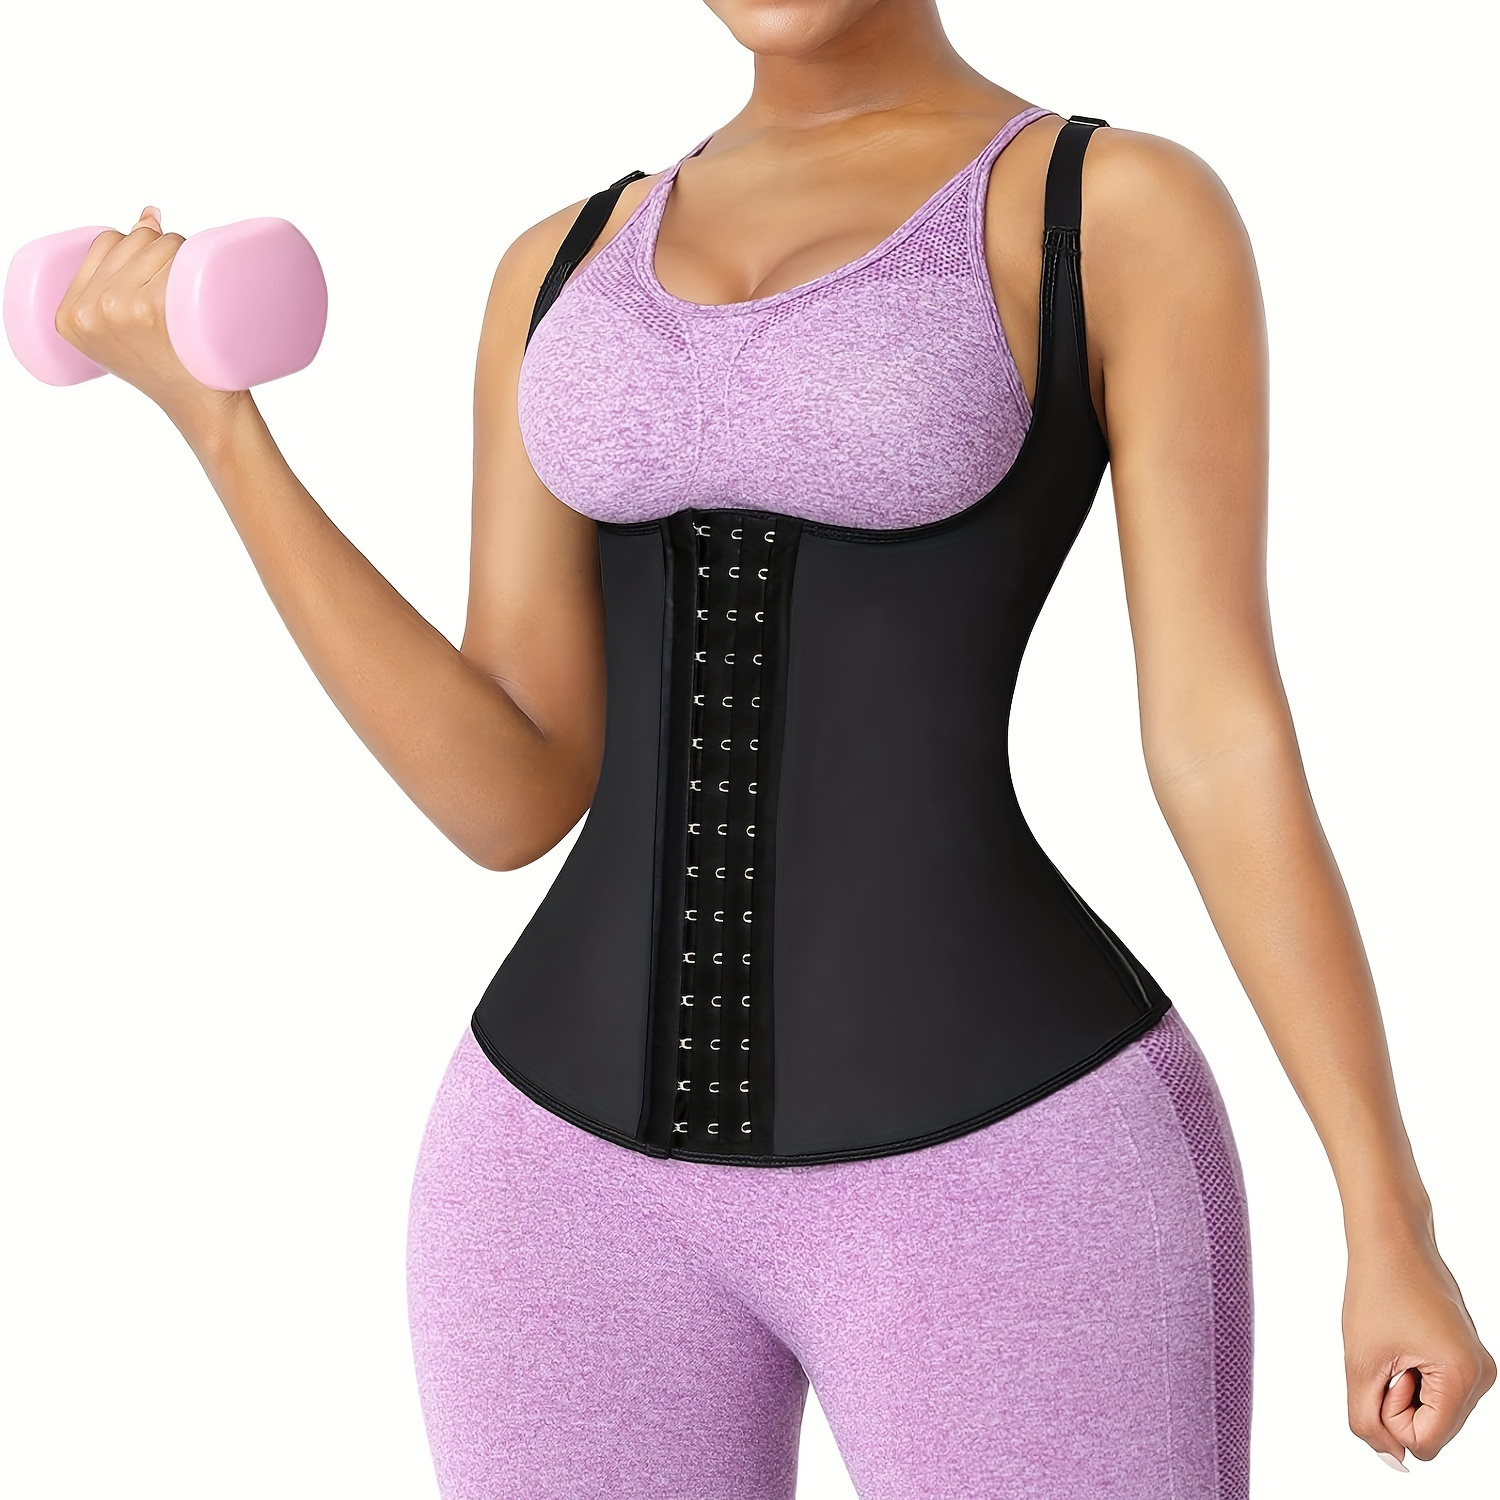 

Women's Waist Trainer Corset Vest, Breathable Sports Shapewear For Fitness Body Shaper, Order A Size Up